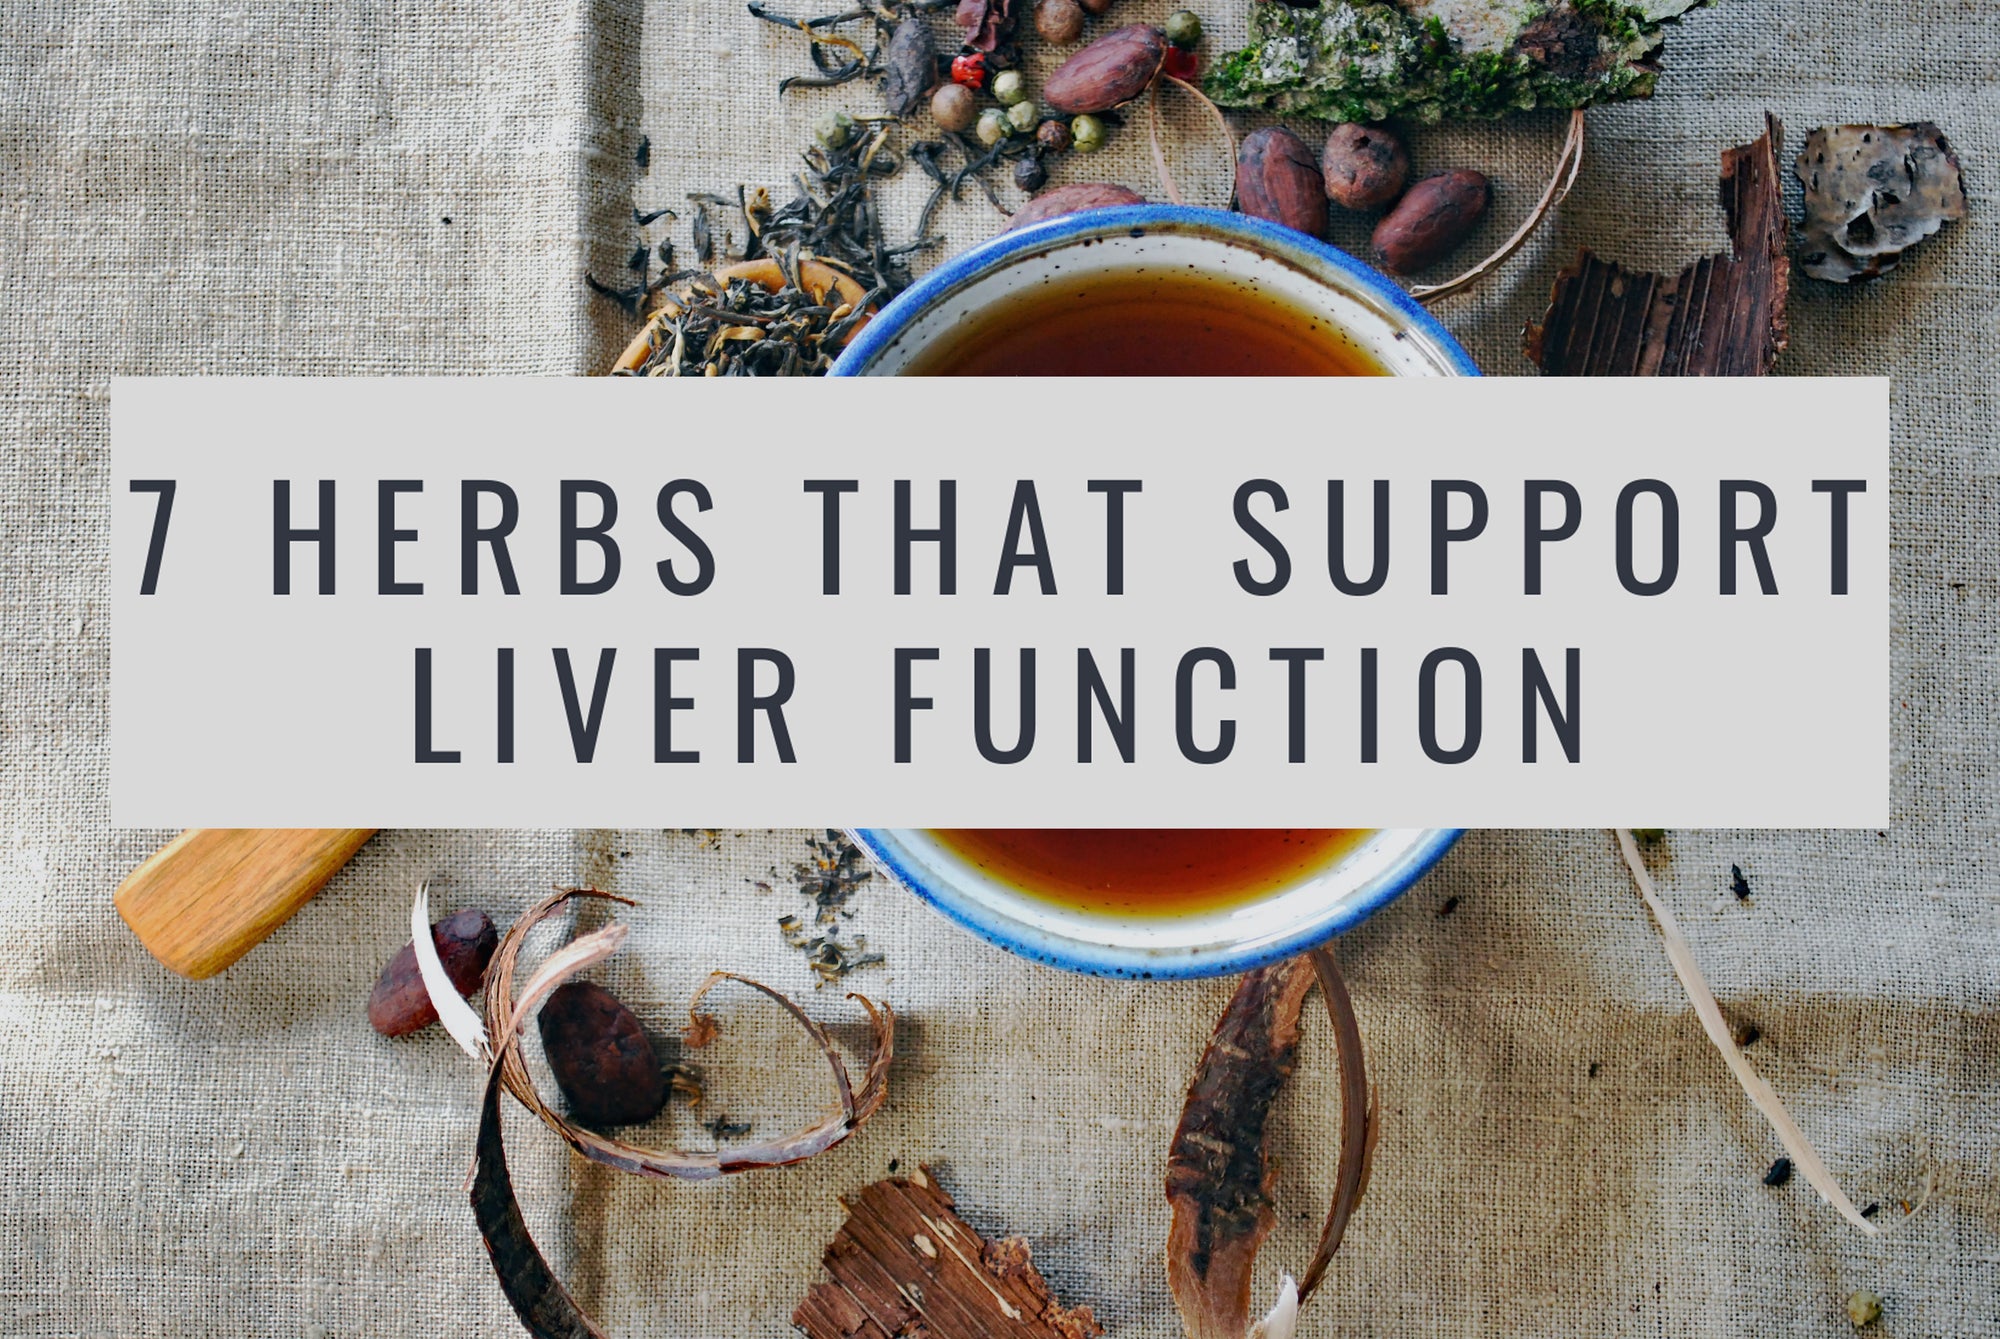 7 HERBS THAT SUPPORT LIVER FUNCTION